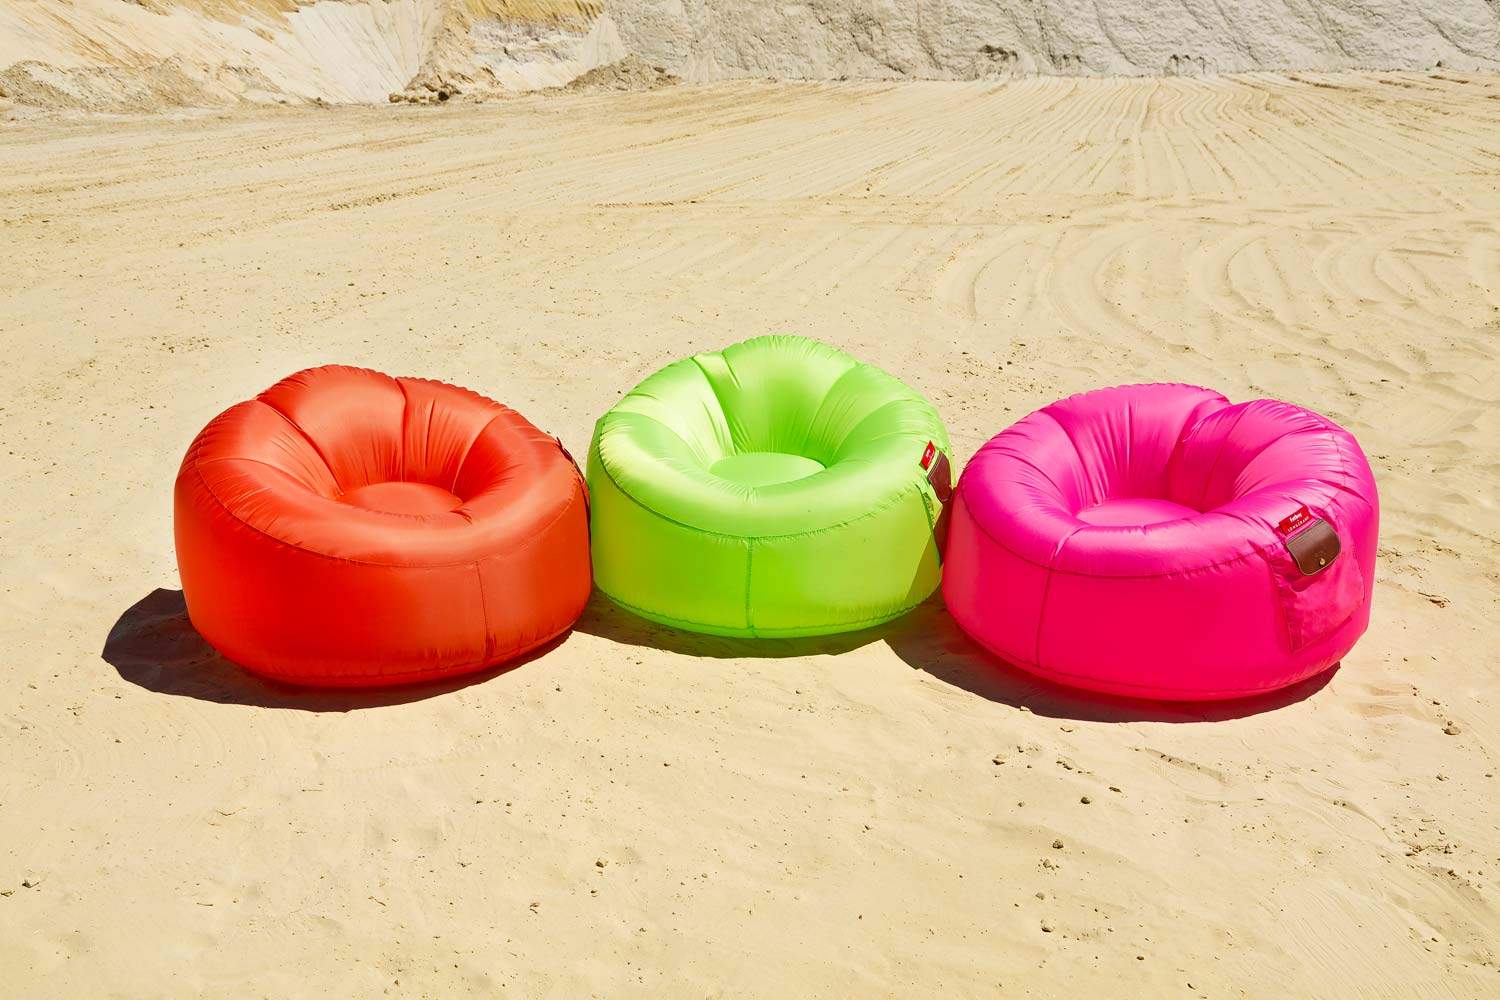 Longchamp and Fatboy collaborate to make a whimsical inflatable pouf: Glamping O